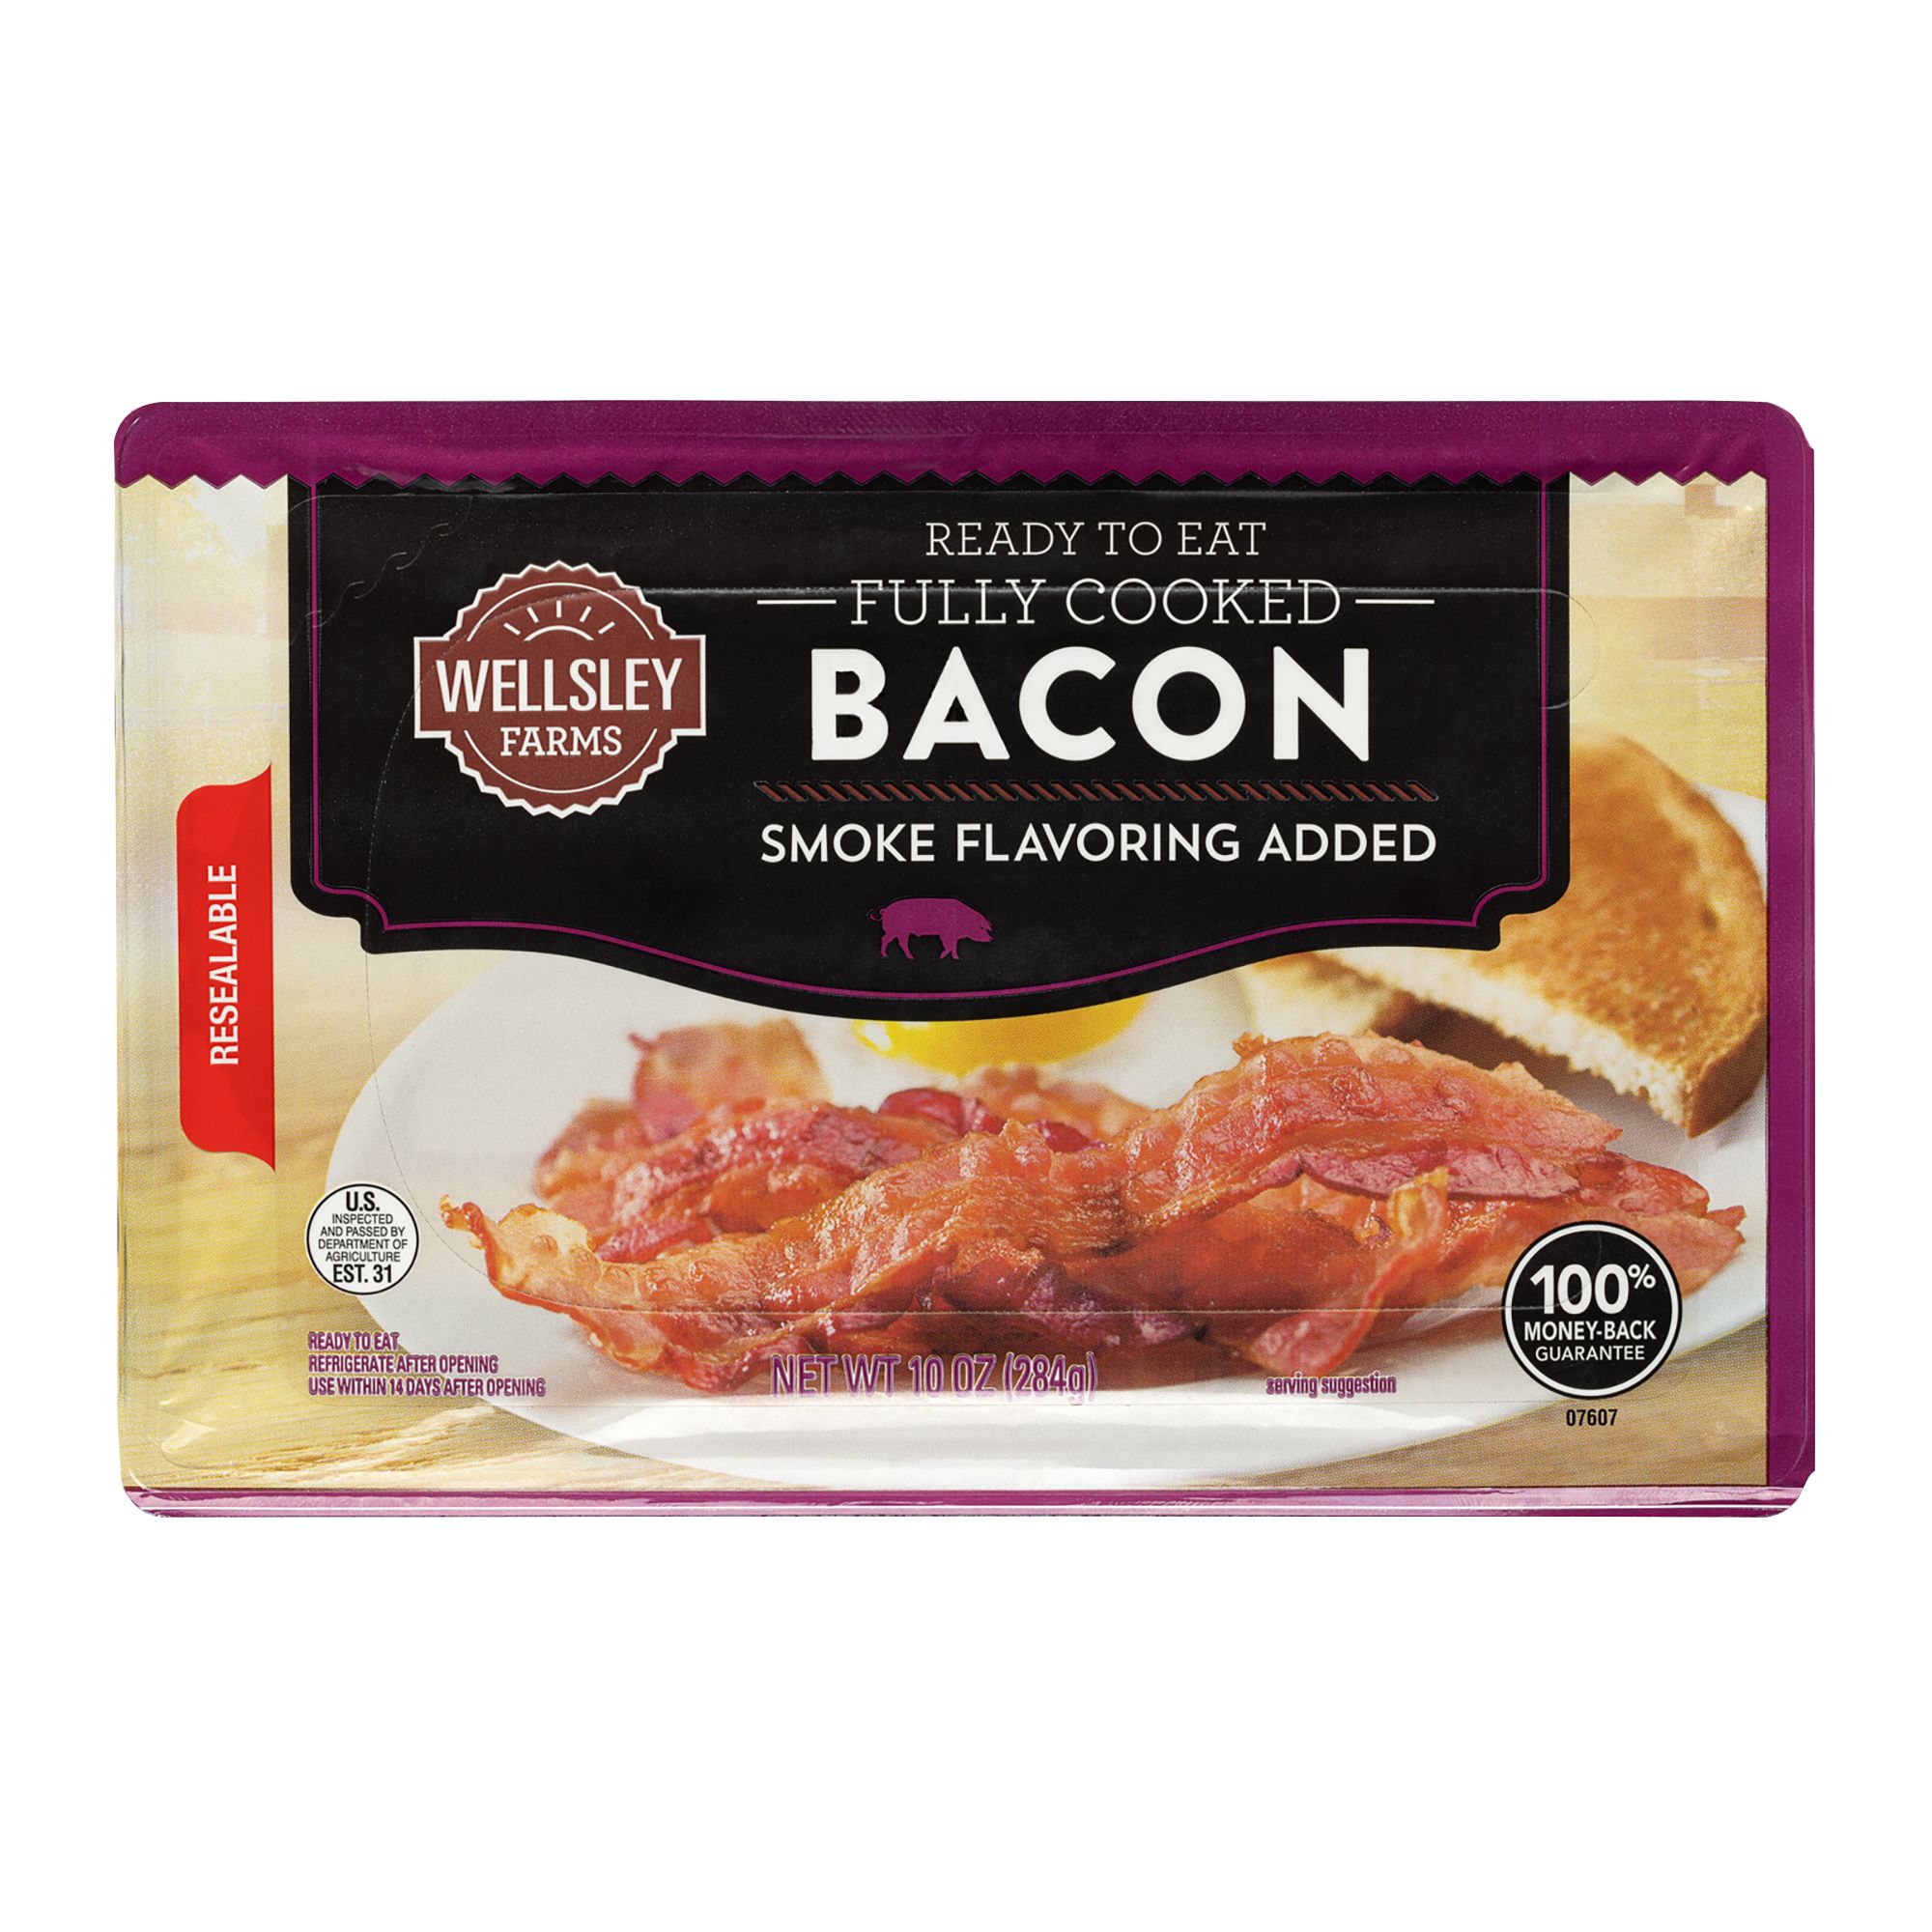 Wellsley Farms Ready-To-Eat Fully Cooked Bacon, 10 oz.